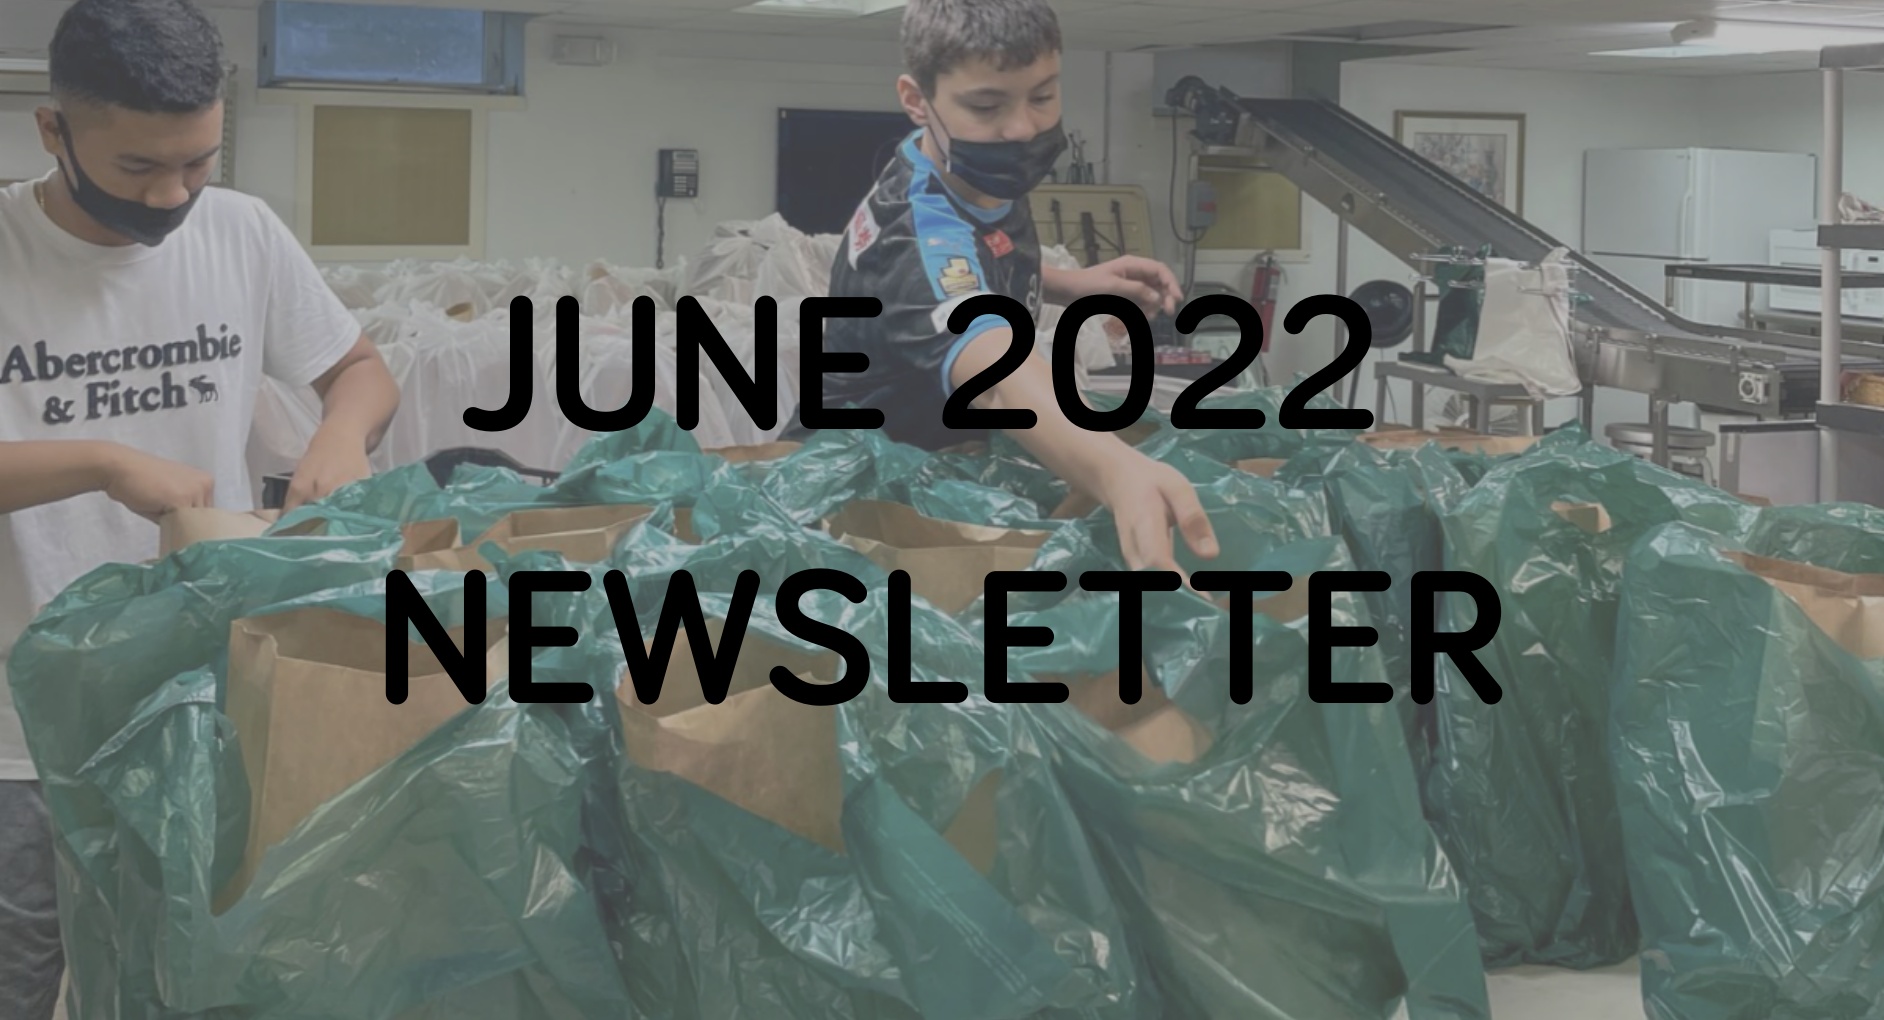 A poster on June 2022 newsletter